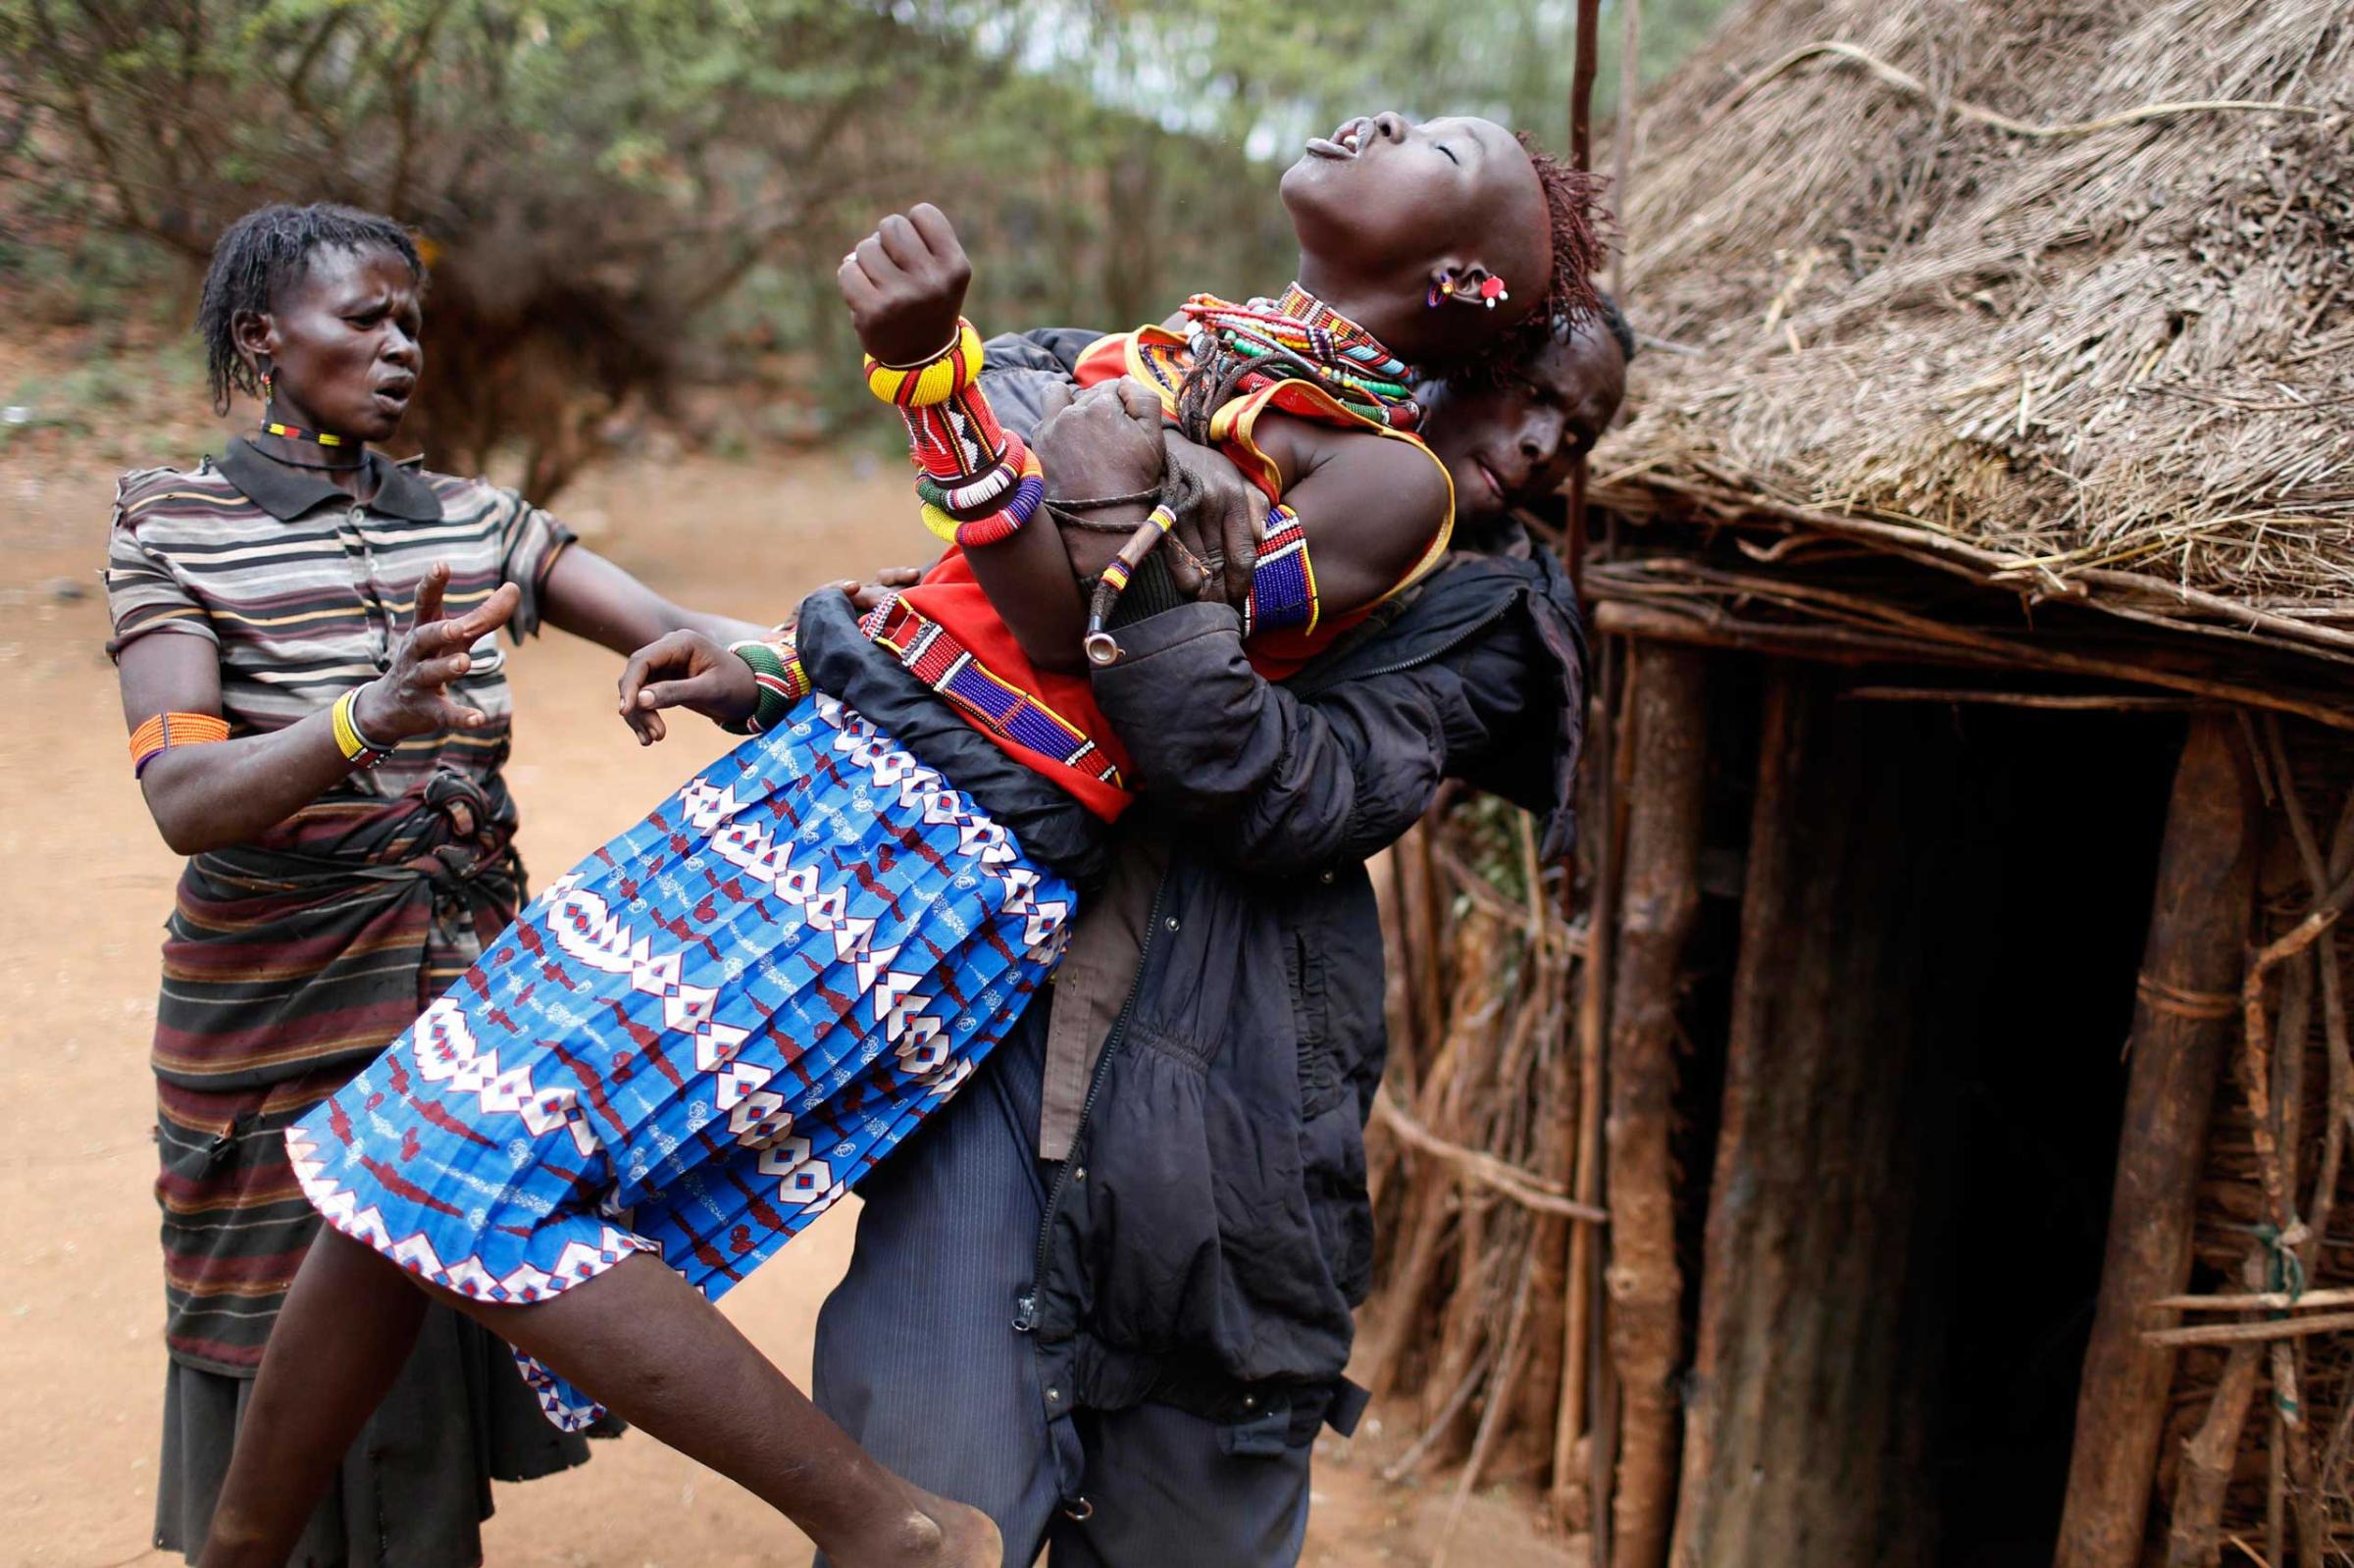 A man holds a girl as she tries to escape when she realised she is to to be married, about 80 km (50 miles) from the town of Marigat in Baringo County